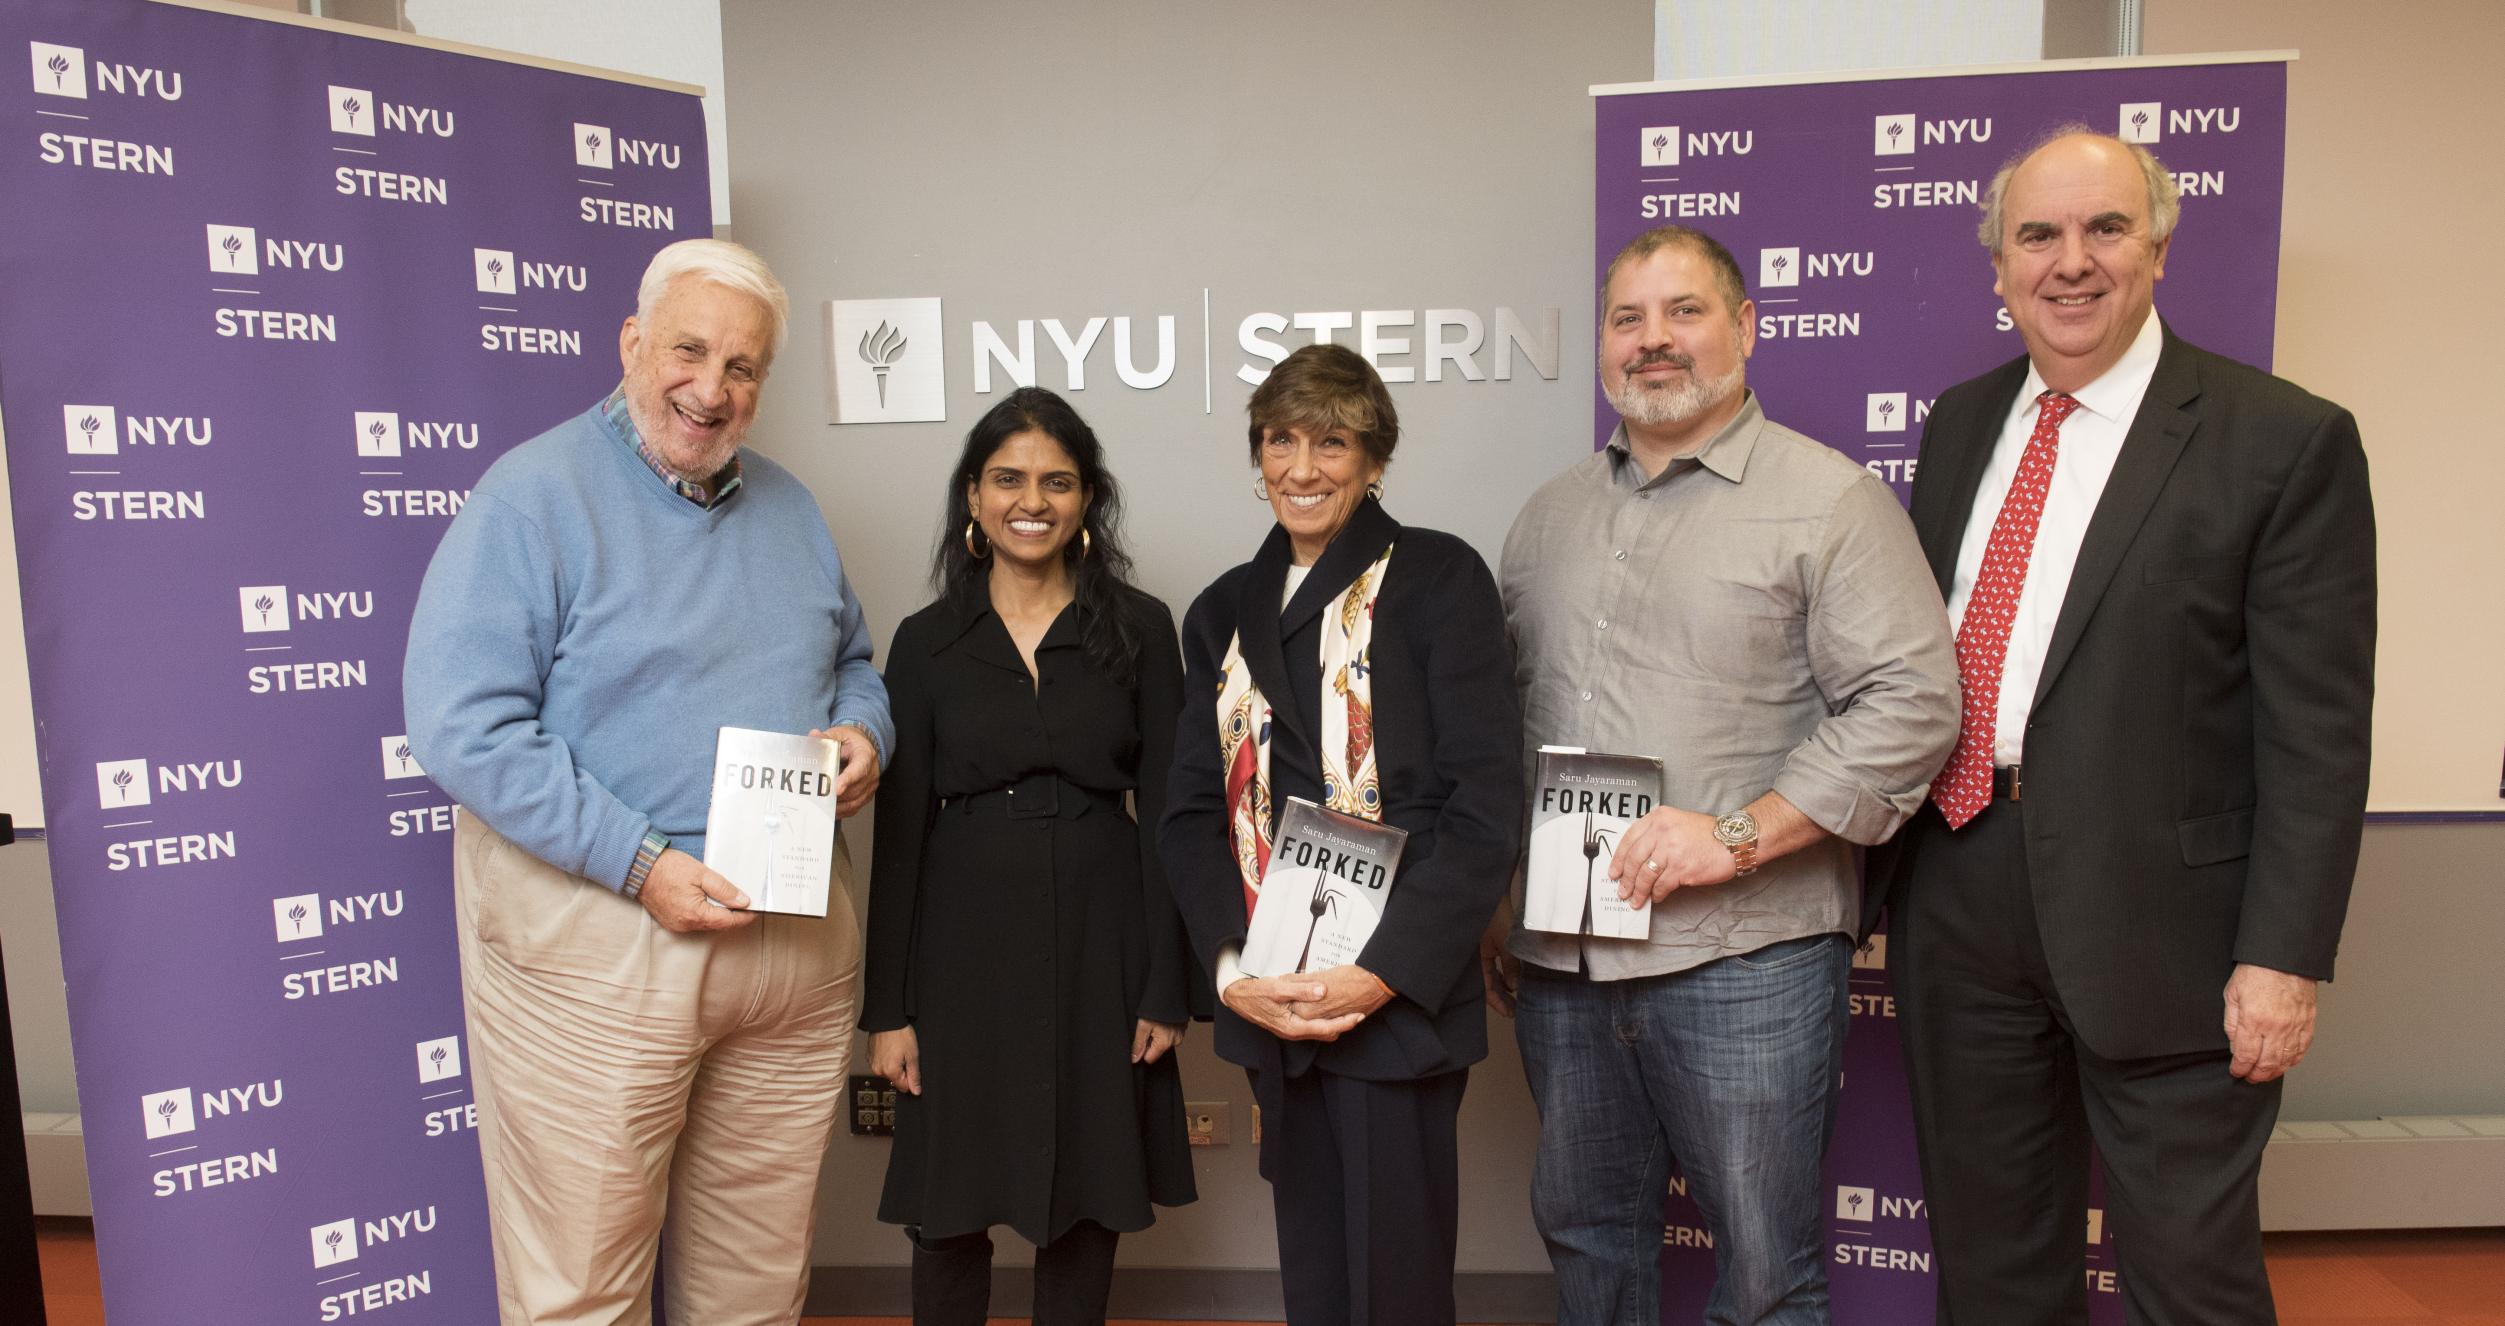 Five people standing in front of a wall with NYU Stern logo, flanked by two purple banners with the NYU Stern logo